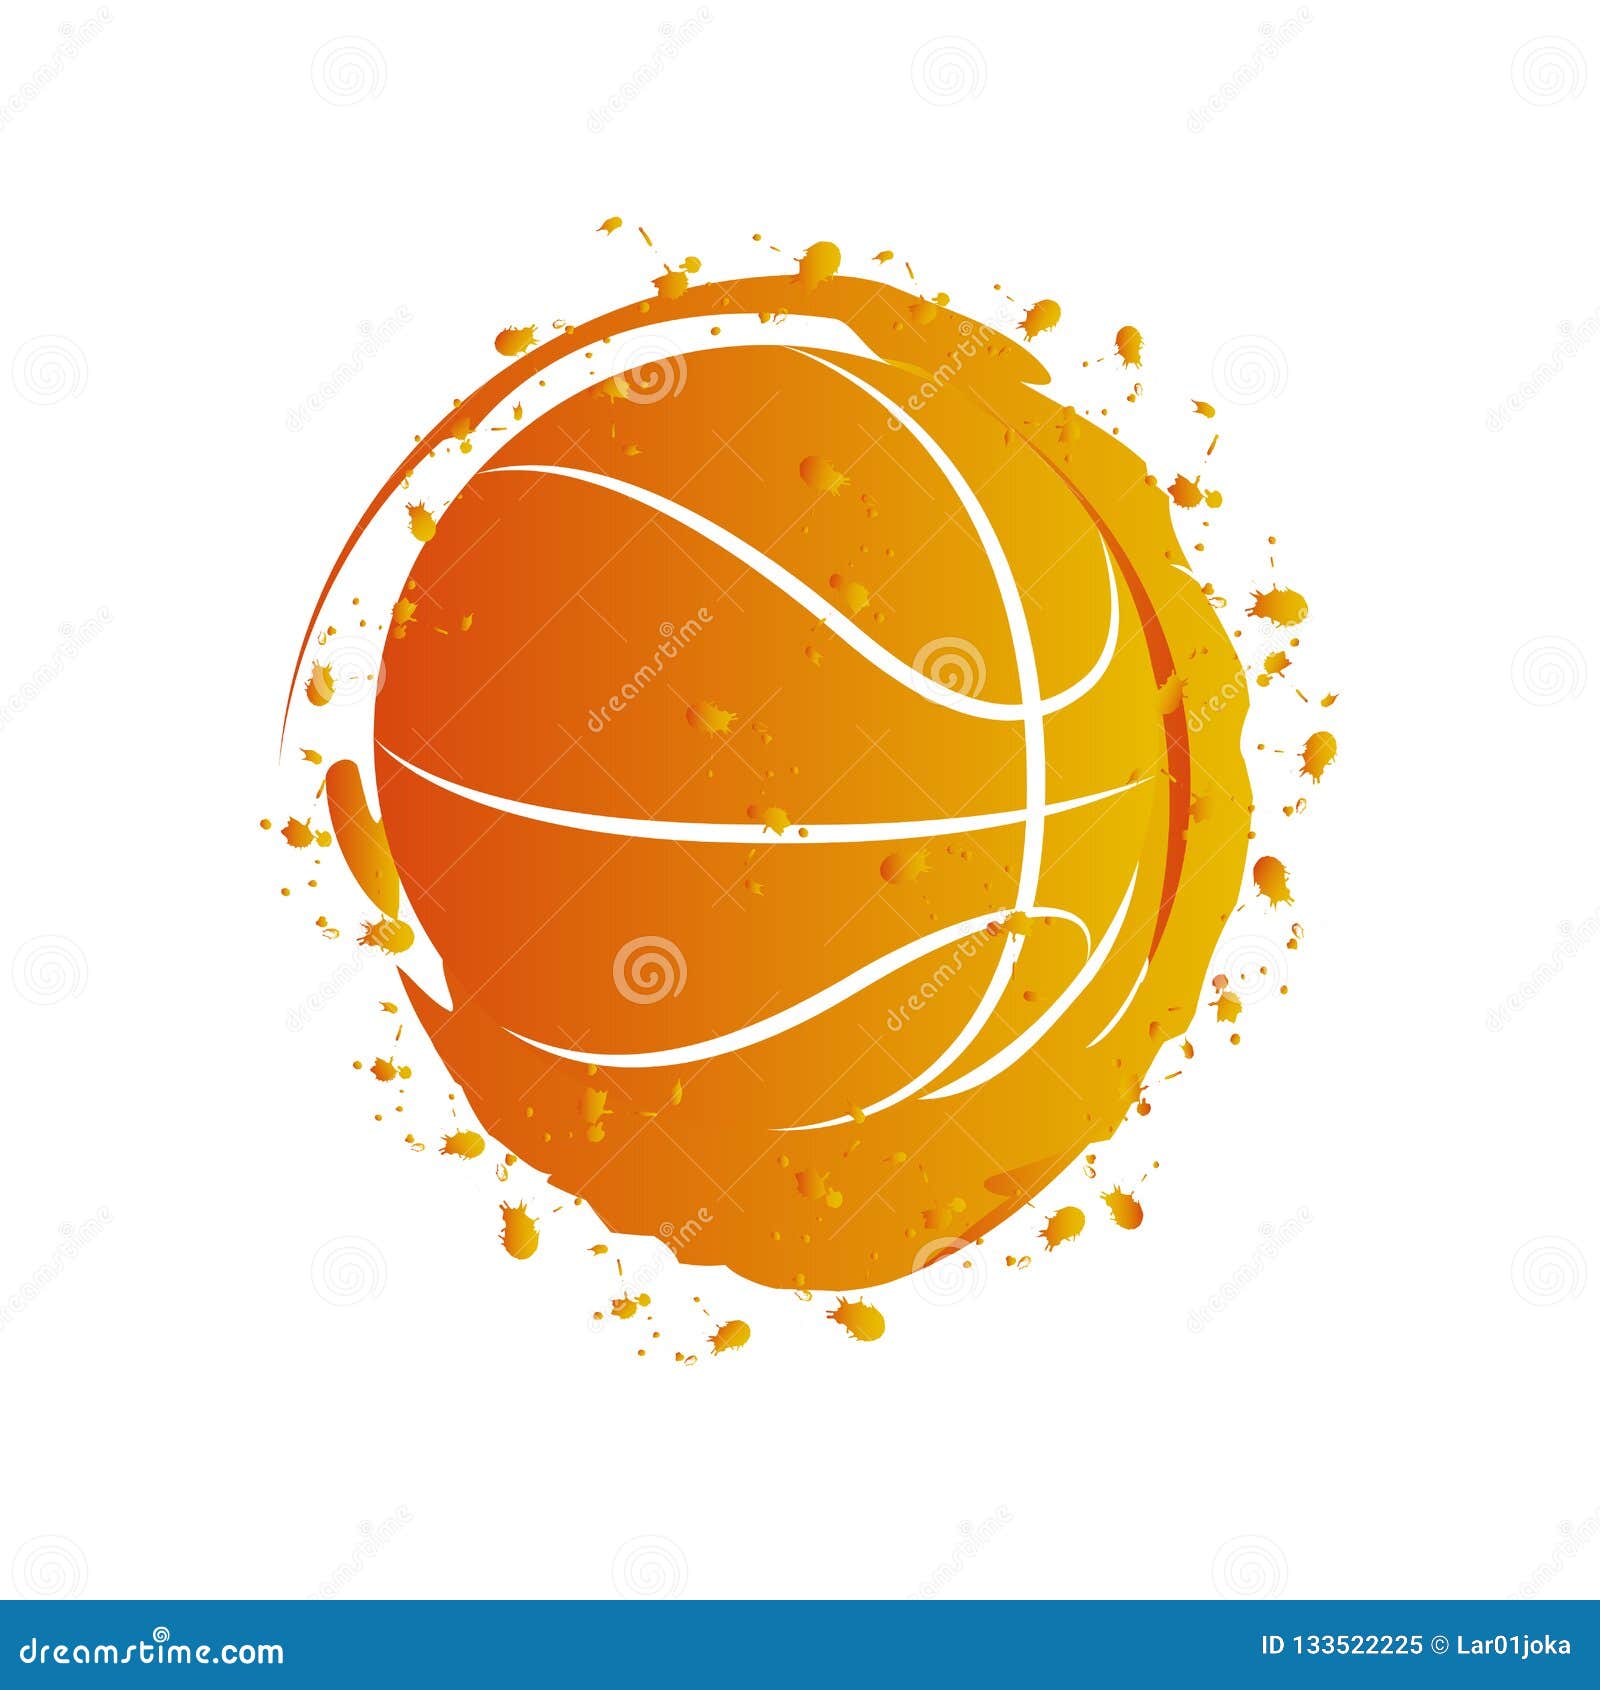 Download Watercolor Effect Of A Basketball Ball Stock Vector - Illustration of clipart, activity: 133522225